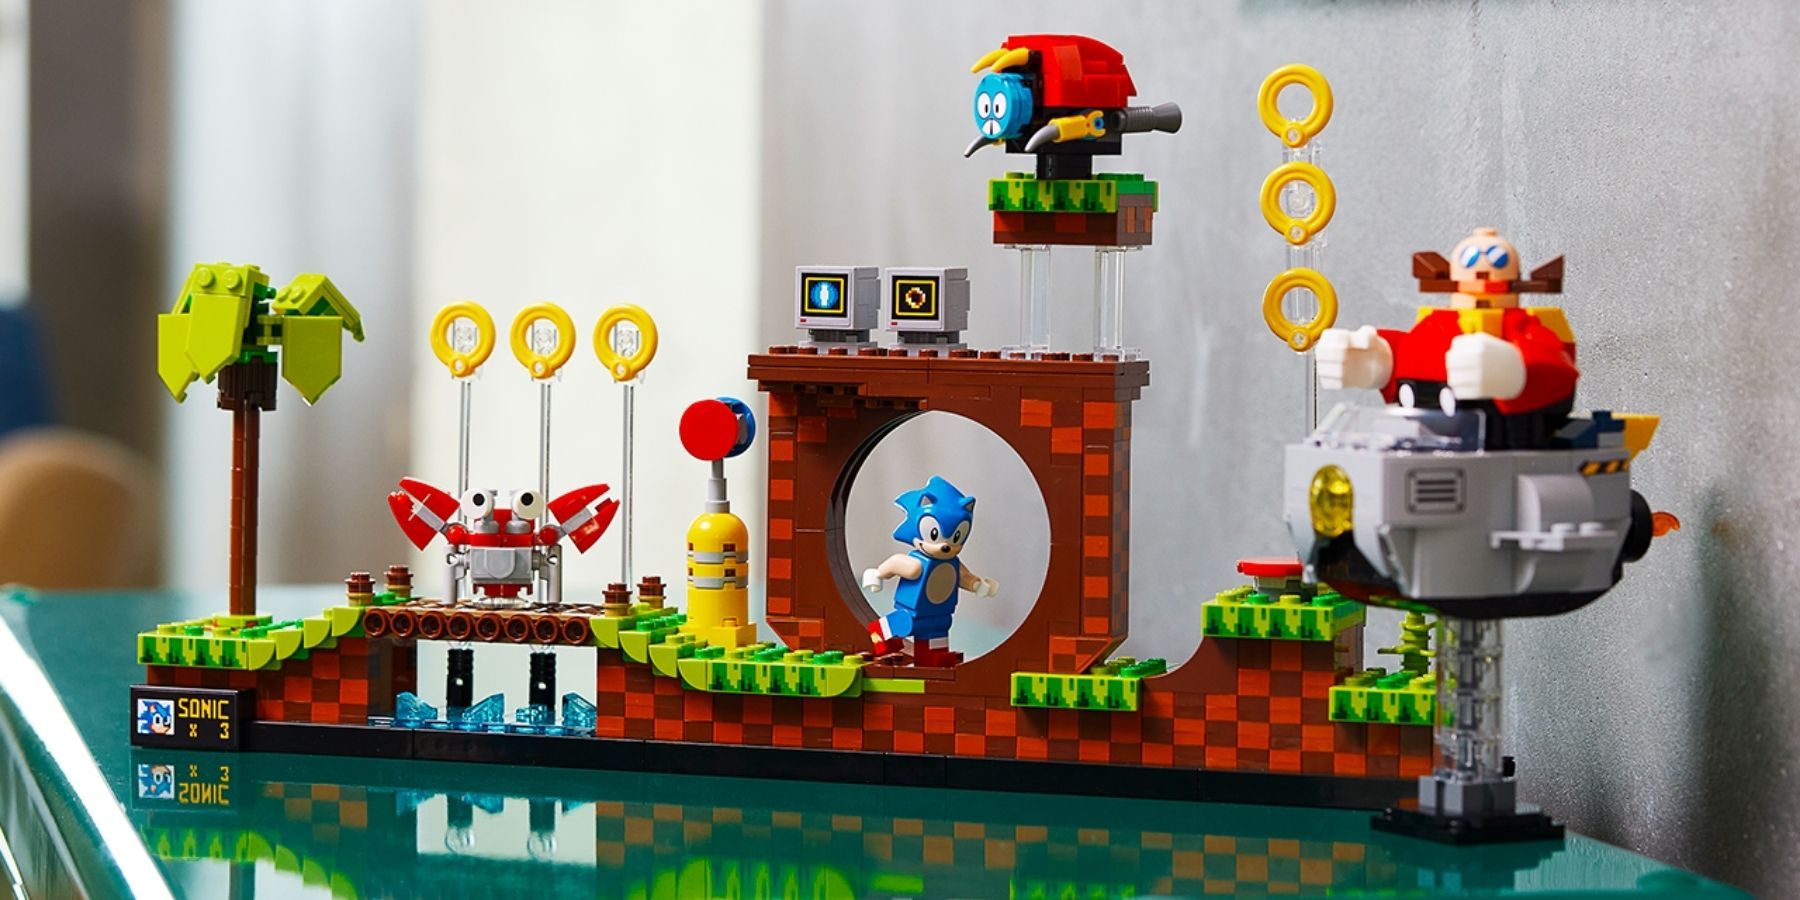 Sonic the Hedgehog Sets Should After Green Zone